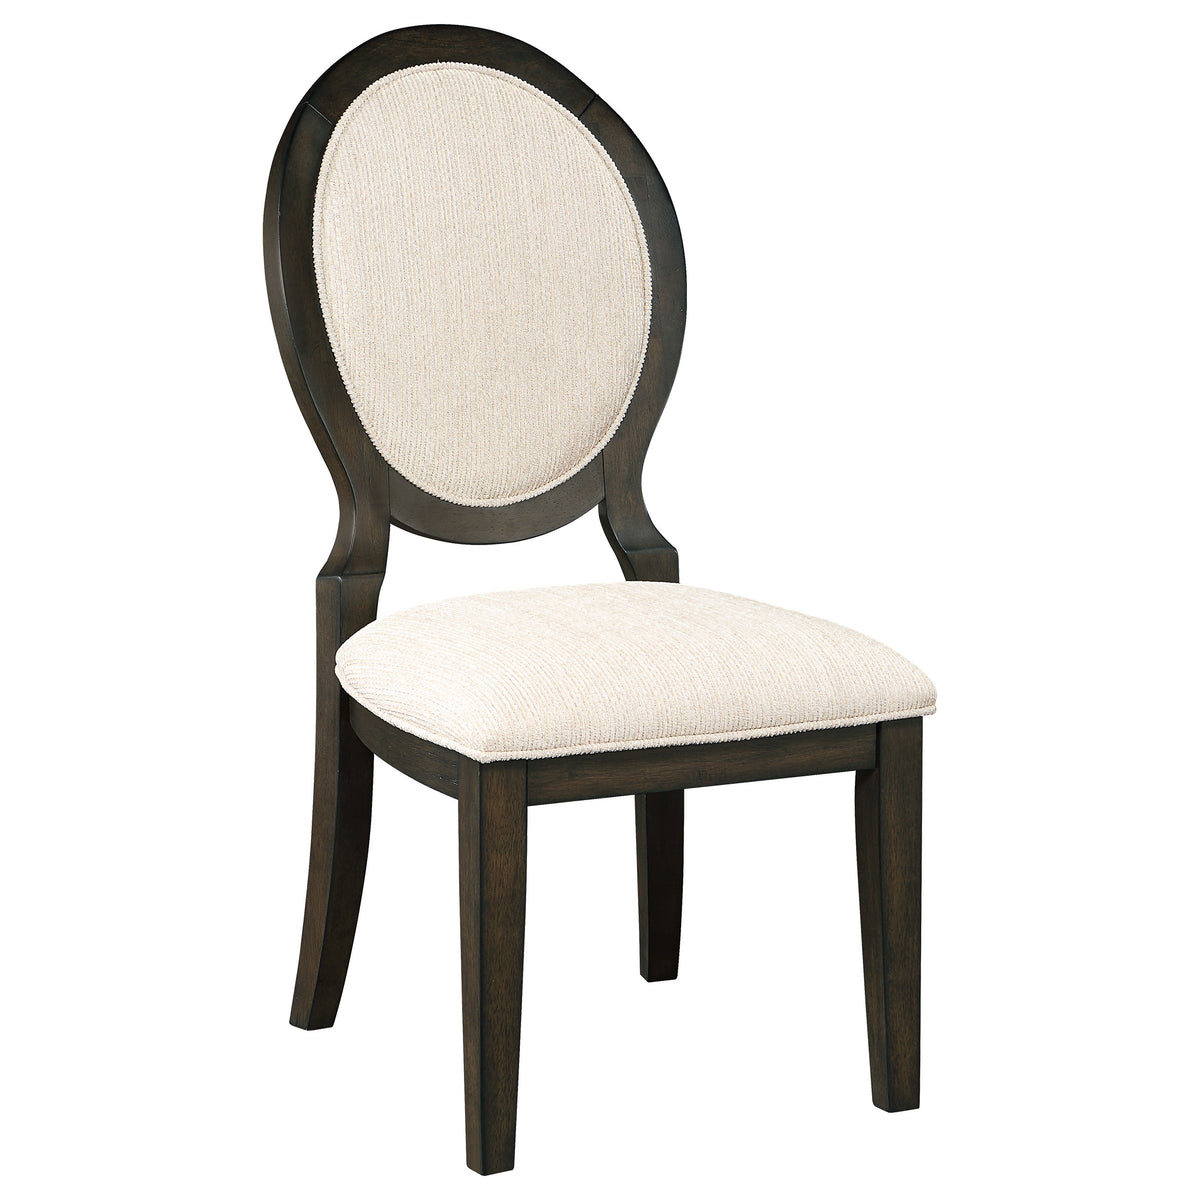 Twyla Upholstered Oval Back Dining Side Chairs Cream and Dark Cocoa (Set of 2) Twyla Upholstered Oval Back Dining Side Chairs Cream and Dark Cocoa (Set of 2) Half Price Furniture